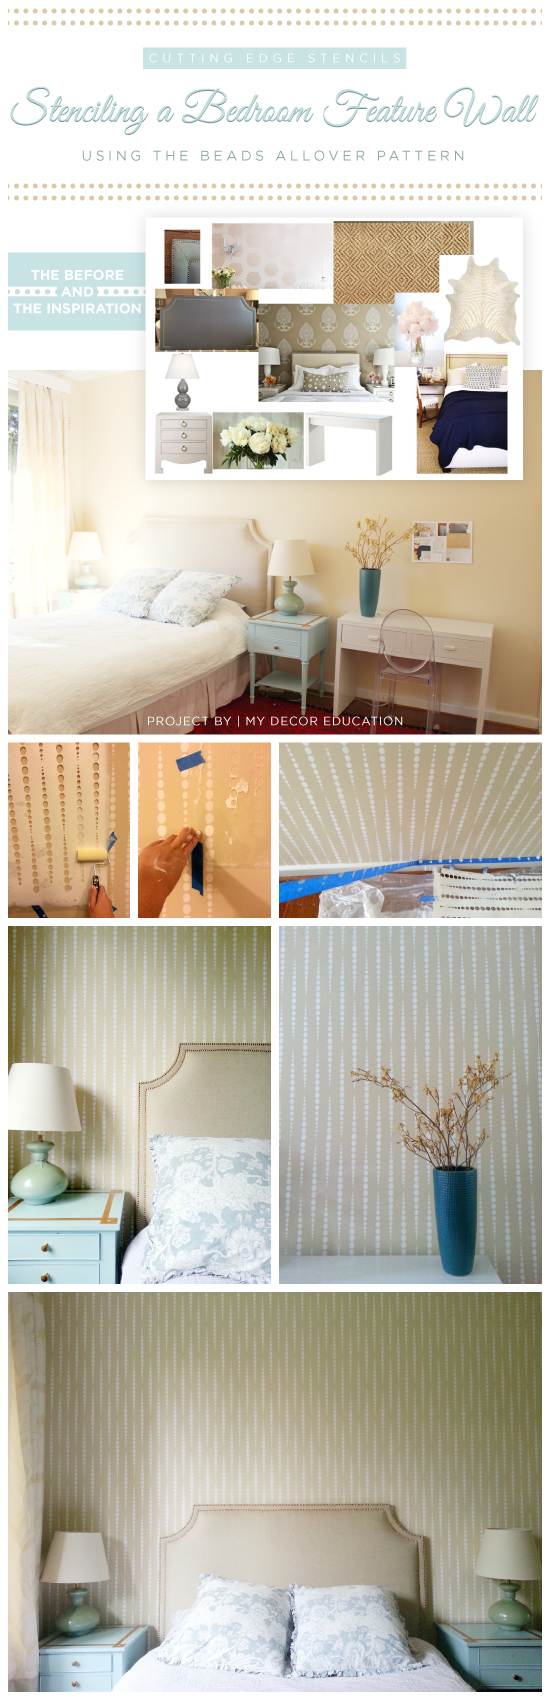 Cutting Edge Stencils shares a DIY stenciled bedroom using the Beads Allover pattern. http://www.cuttingedgestencils.com/beads-wall-stencil-pattern.html